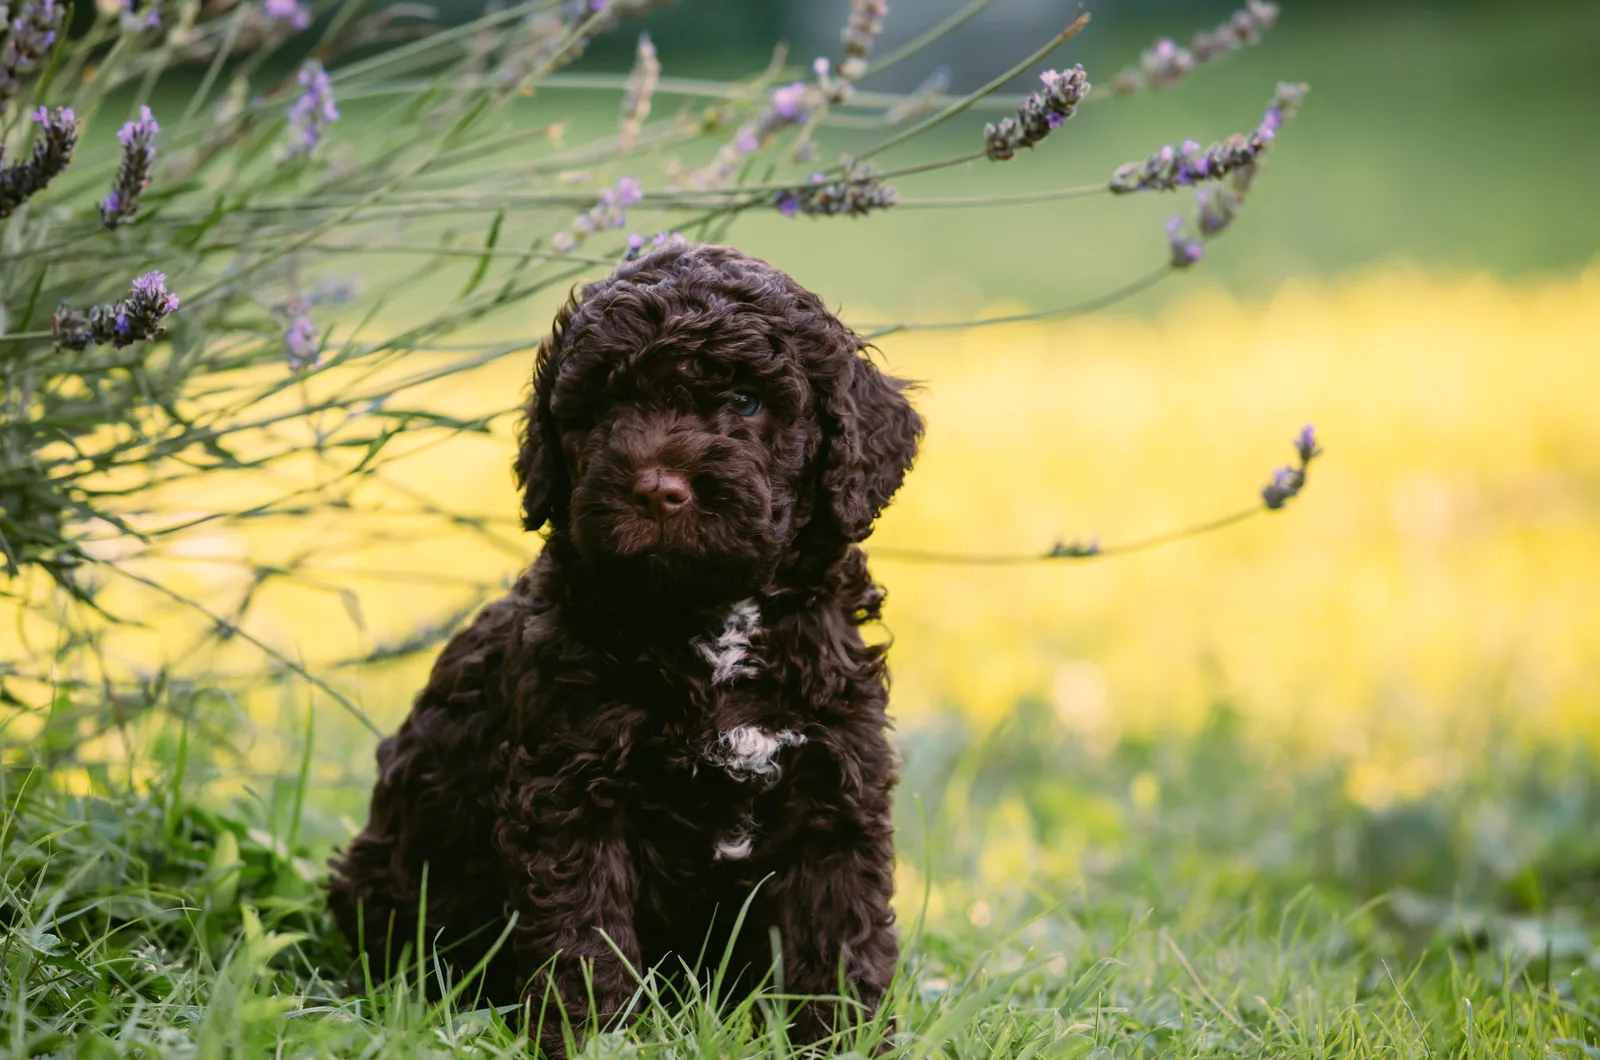 Lagotto Romagnolo puppy sits in the grass